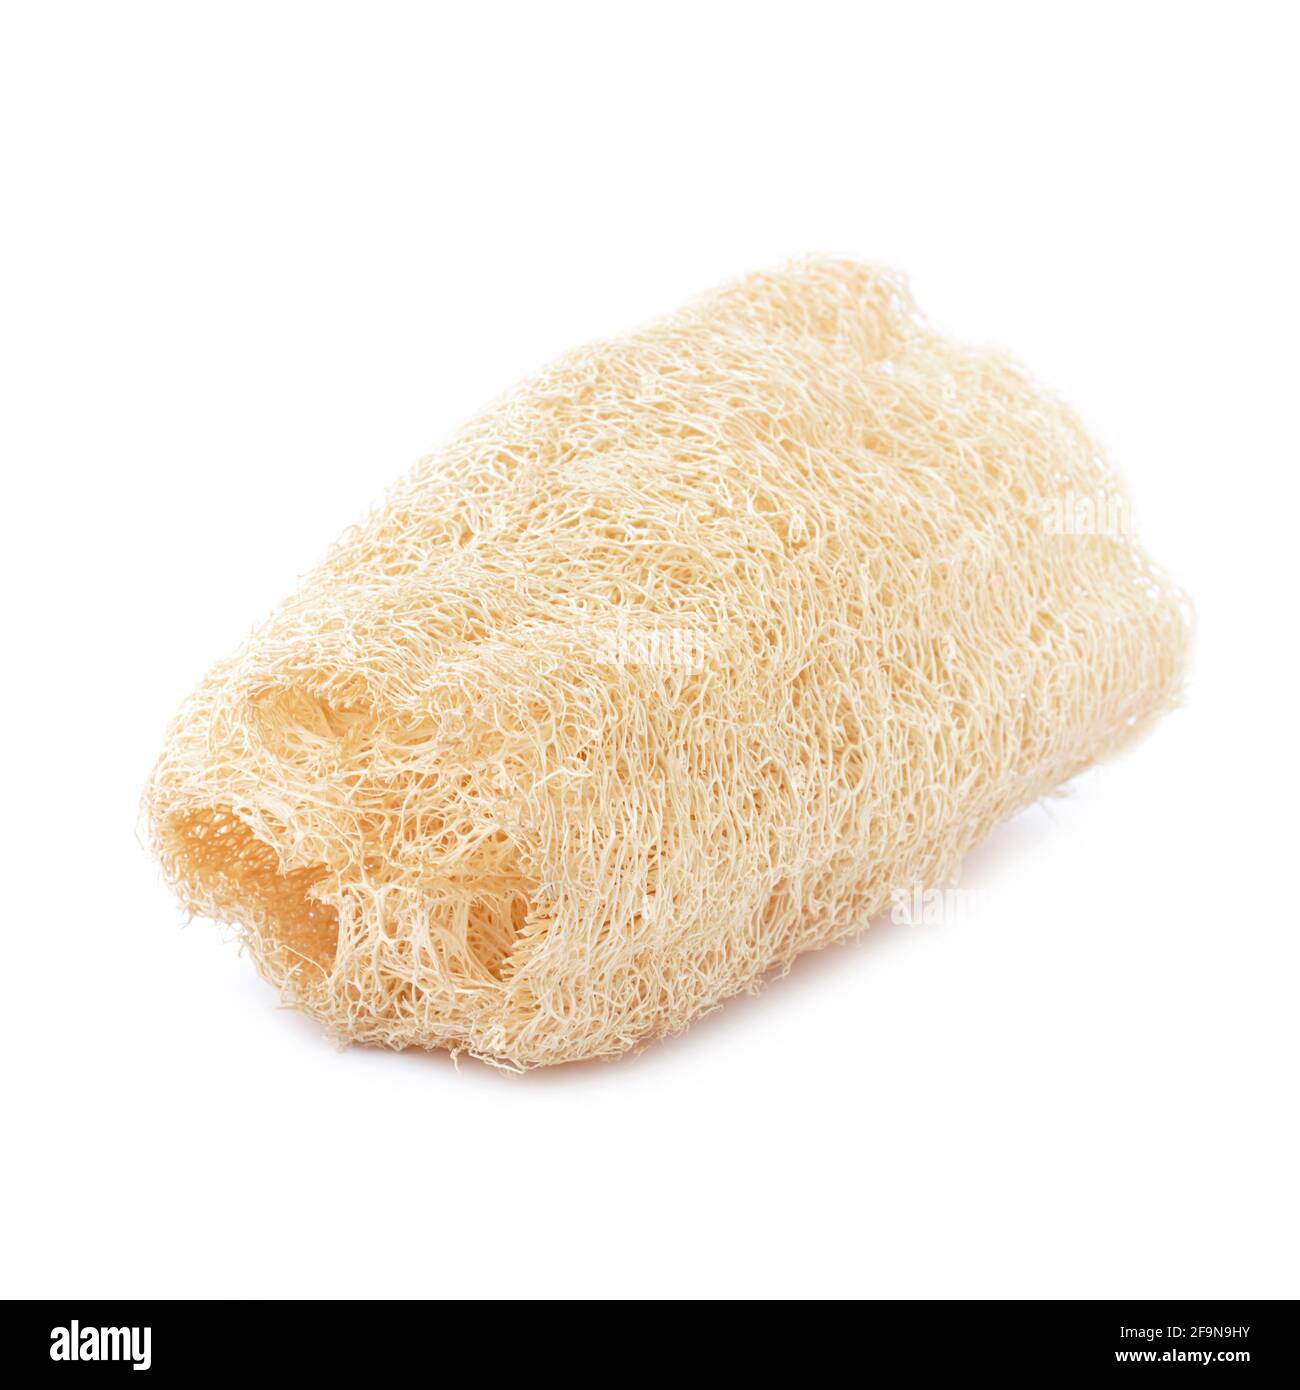 Loofah - natural fiber for body scrubbing - isolated on white Stock Photo